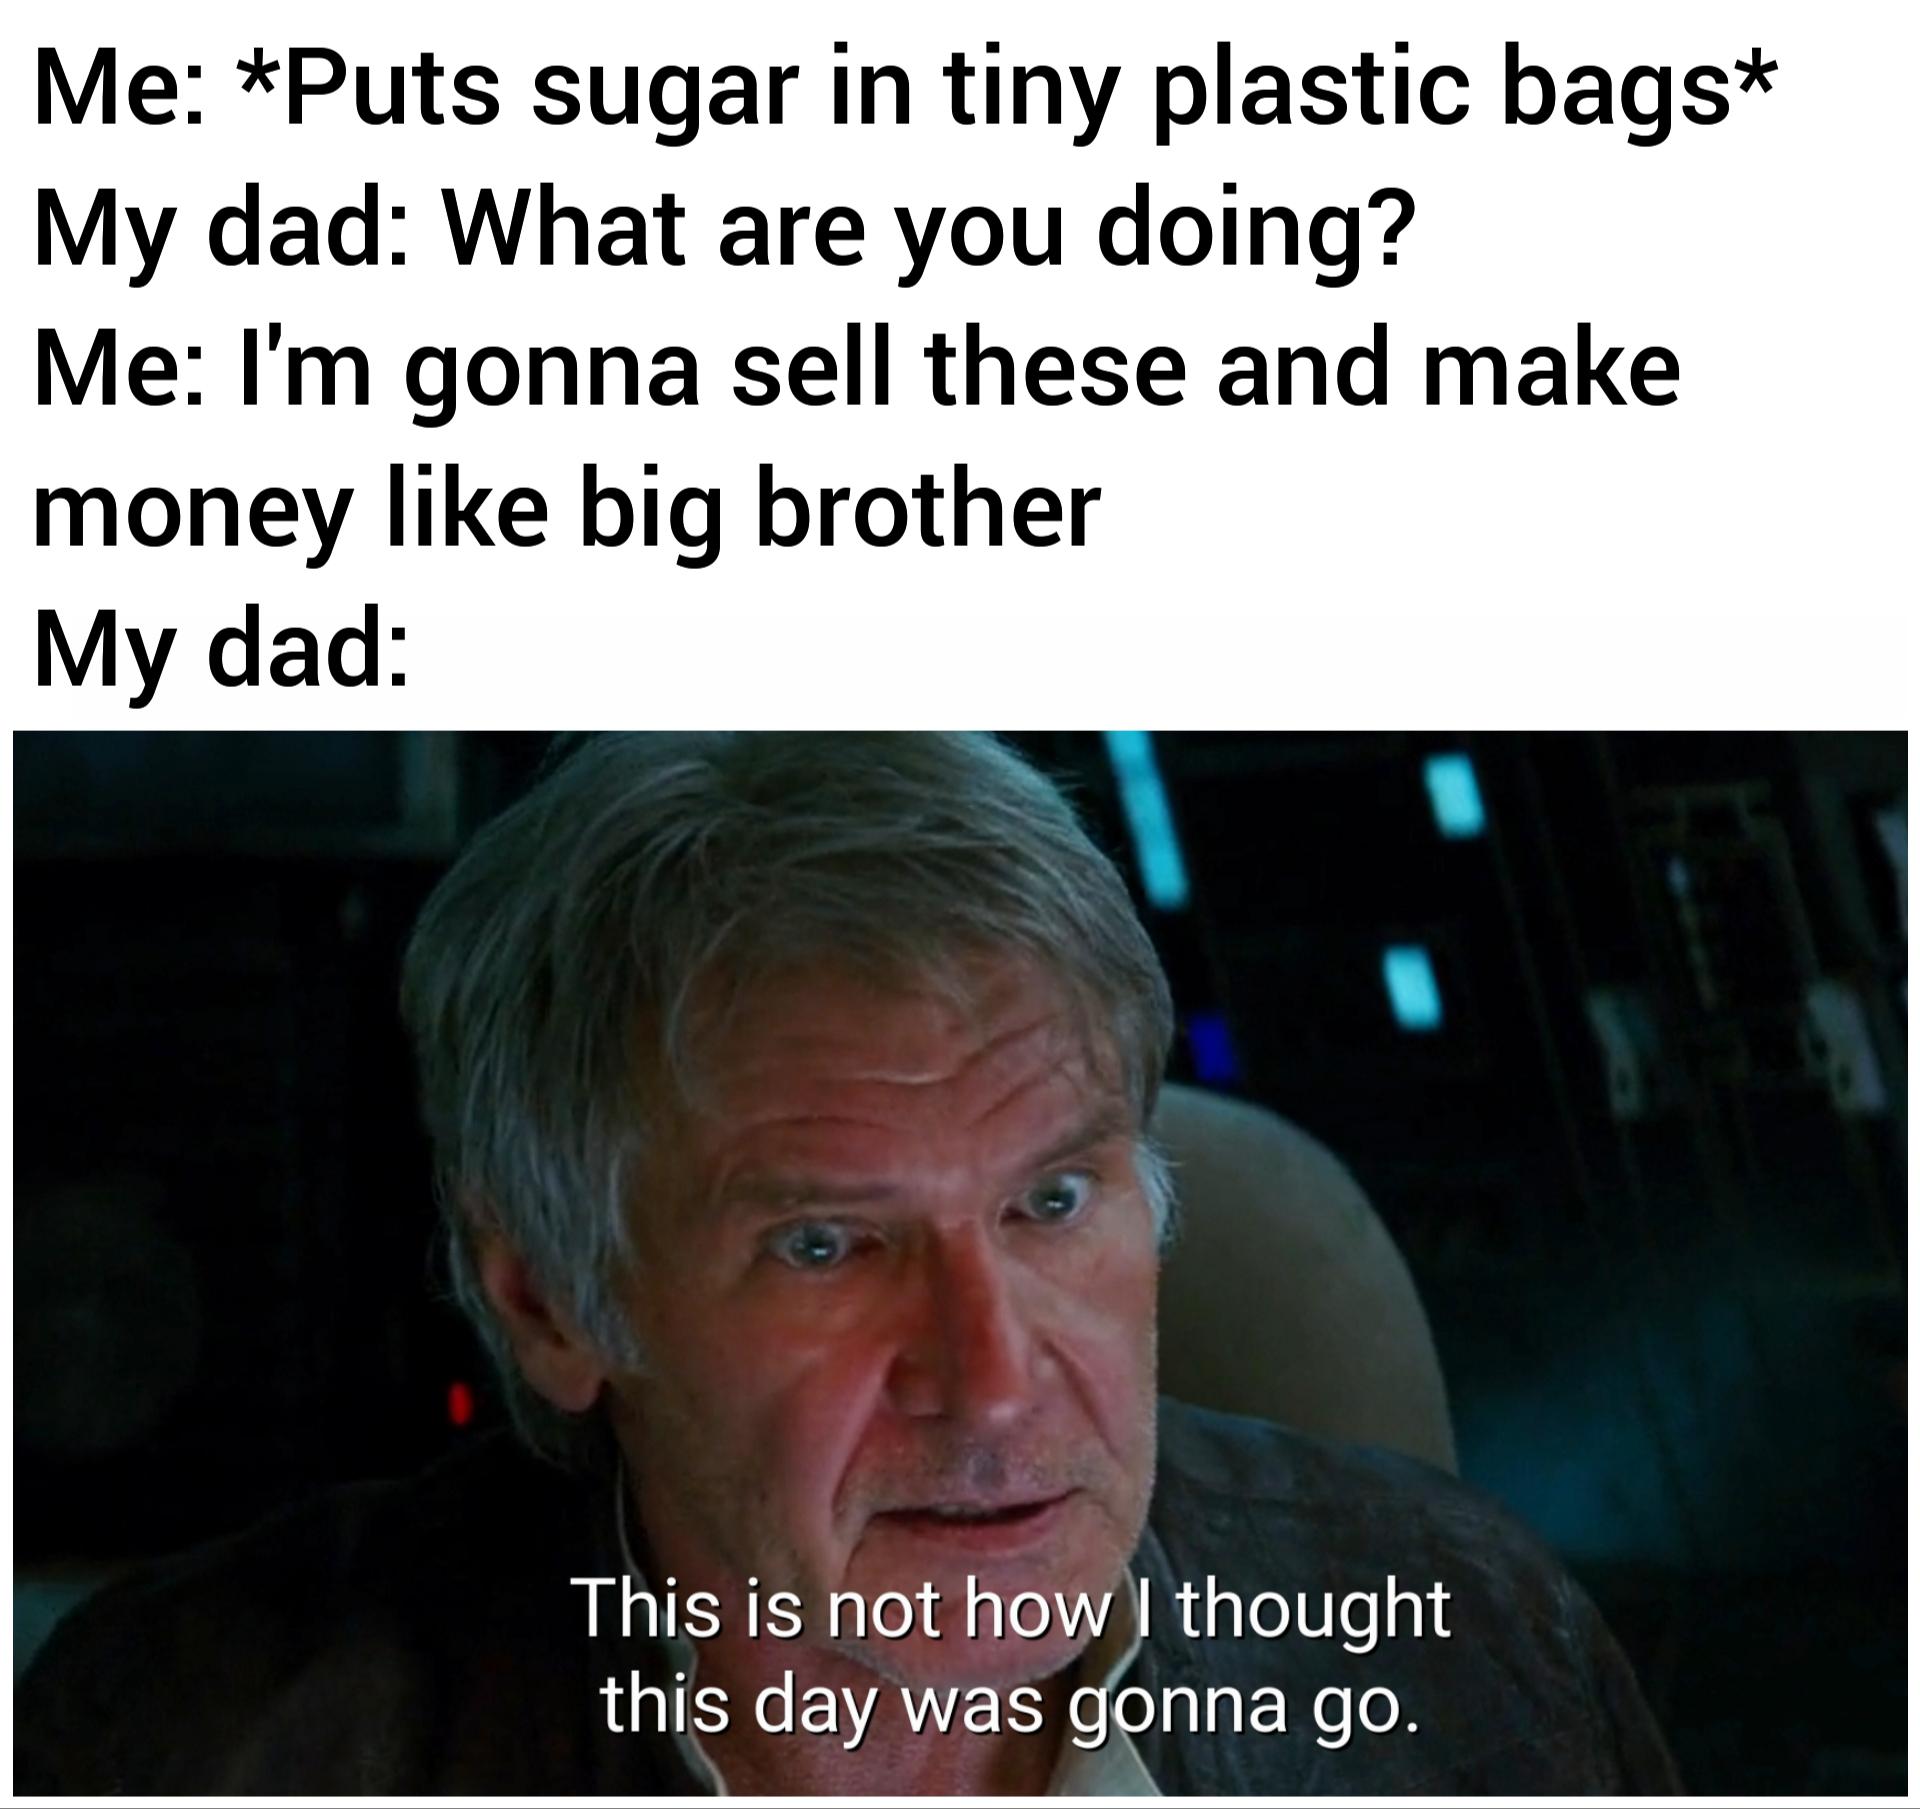 photo caption - Me Puts sugar in tiny plastic bags My dad What are you doing? Me I'm gonna sell these and make money big brother My dad This is not how I thought this day was gonna go.